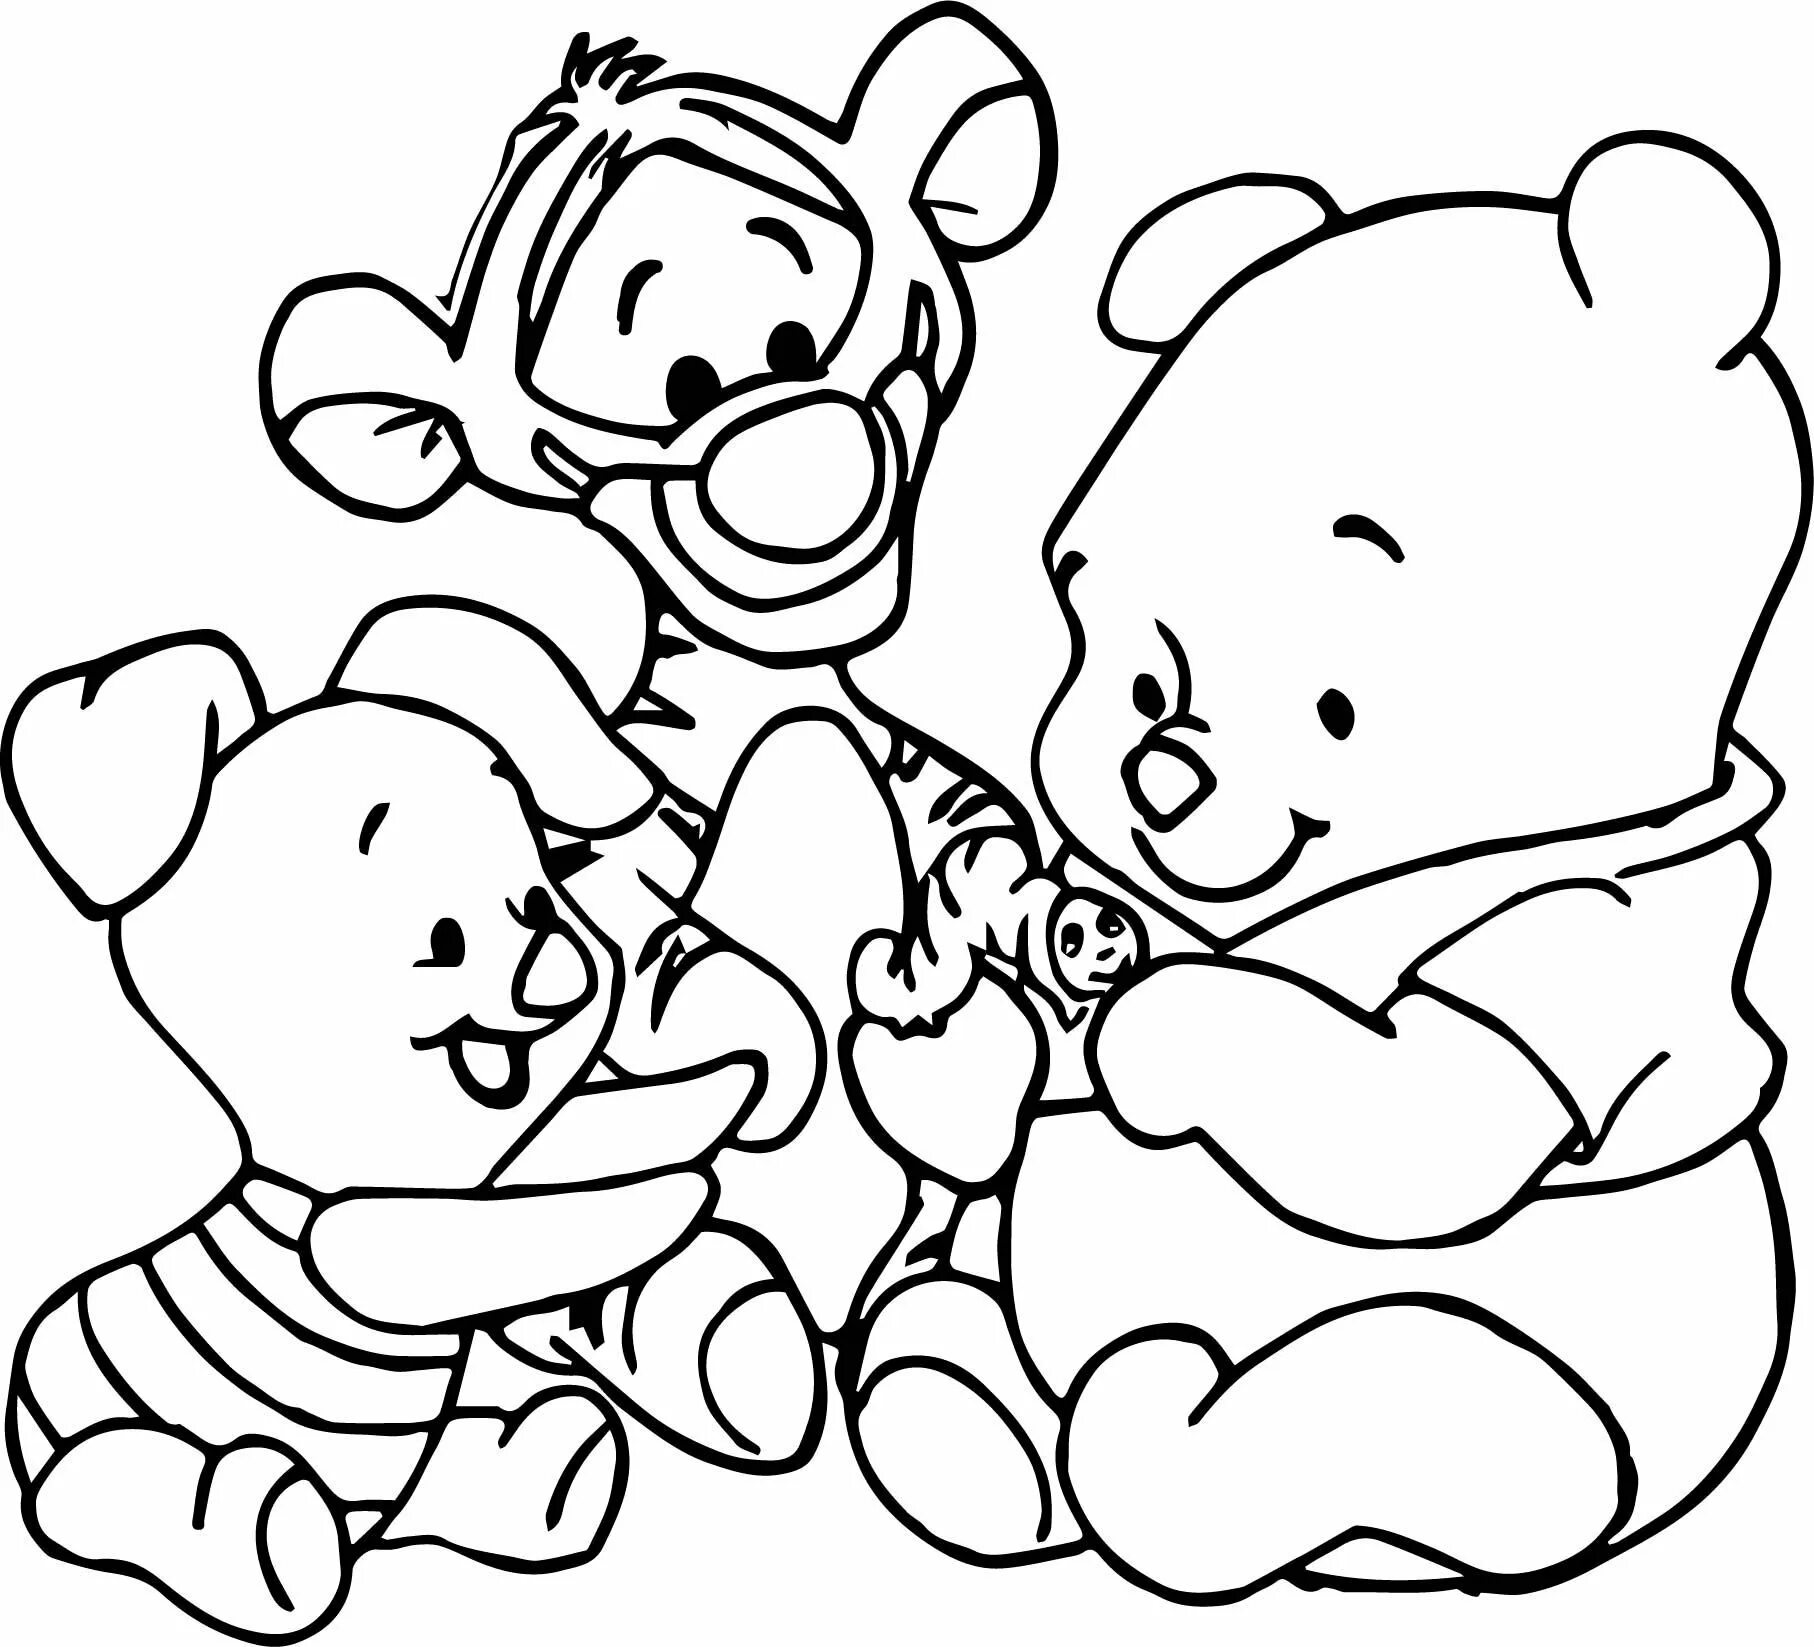 Crazy color friendship coloring pages for preschoolers